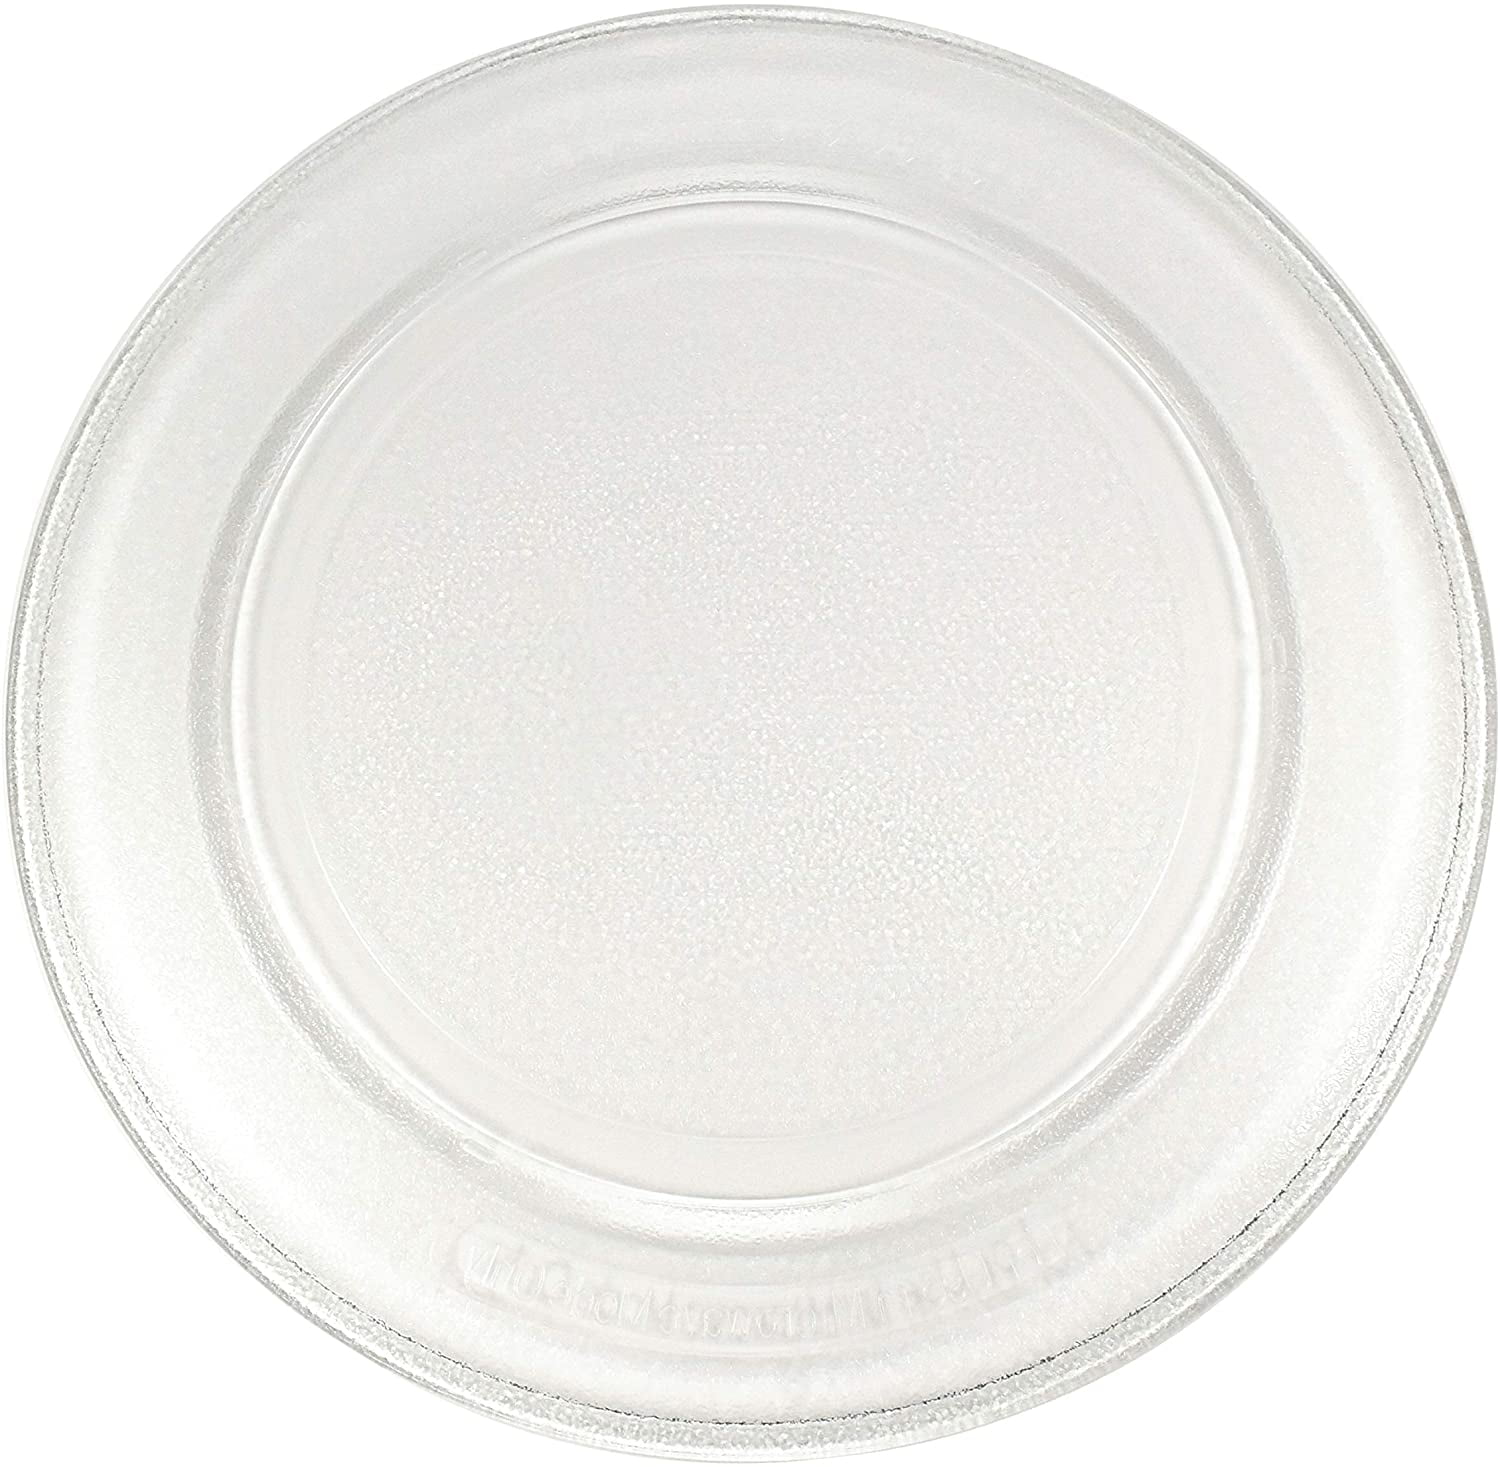 HQRP 12.5" Glass Turntable Tray for Electrolux Microwave Oven Cooking Plate 